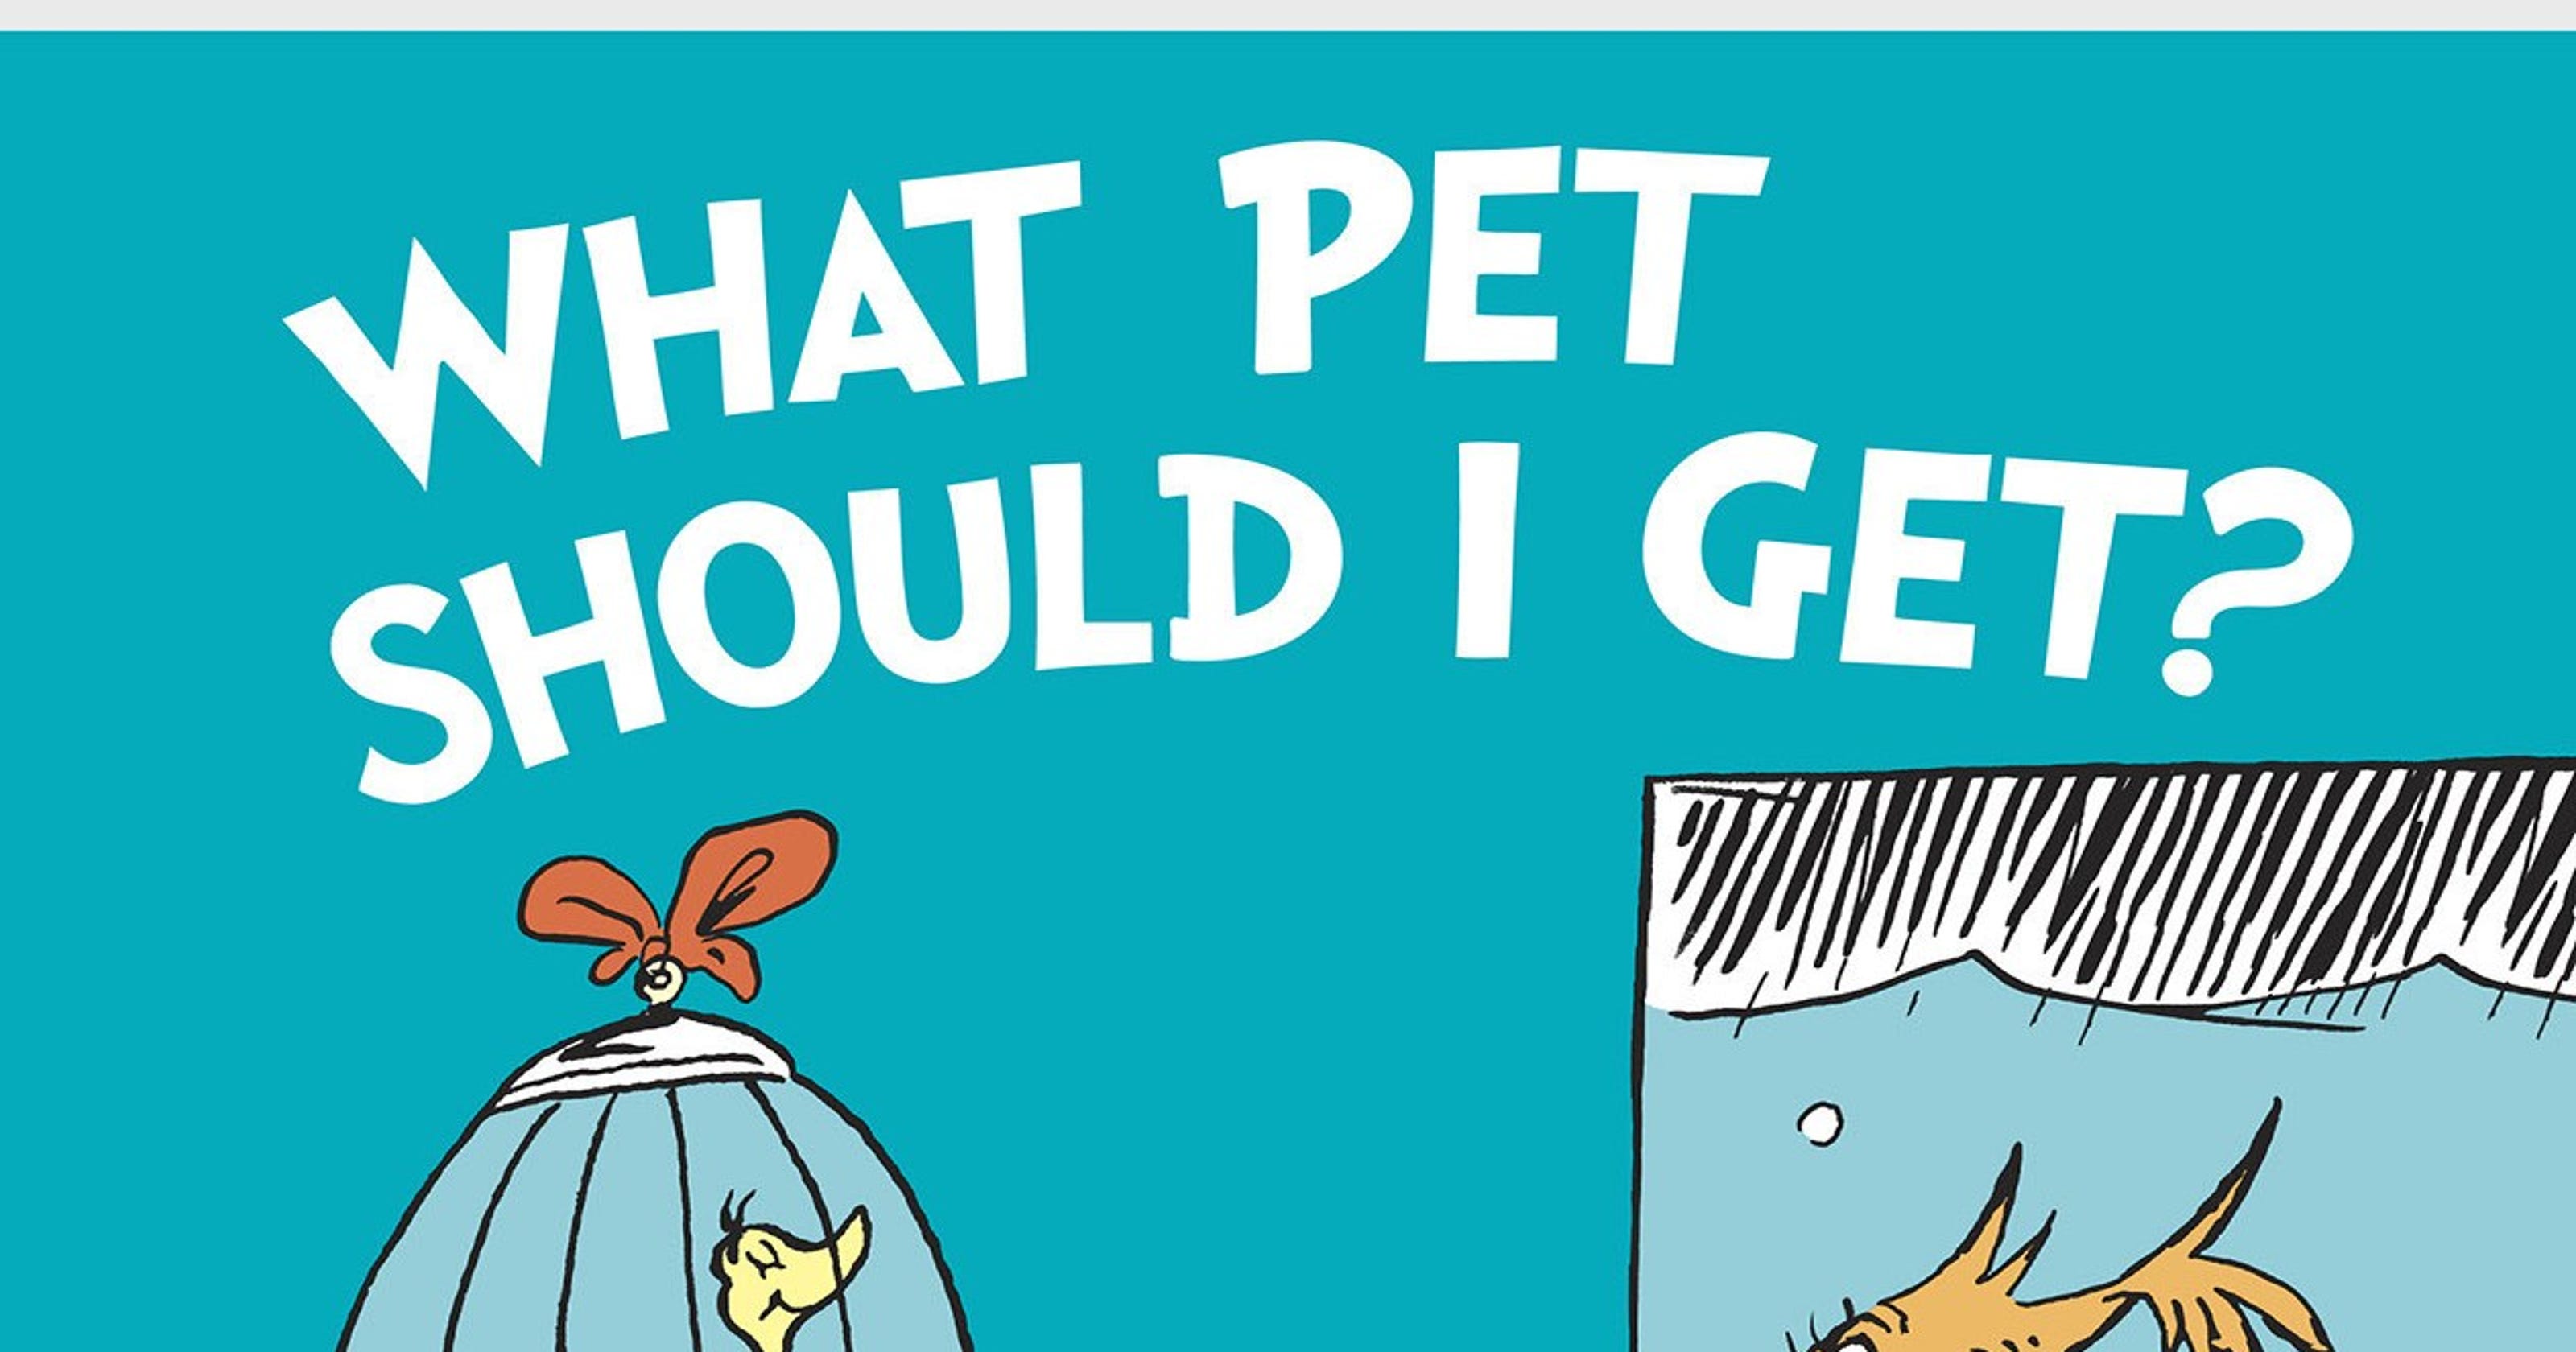 Dr Seuss Returns With Newly Discovered Book